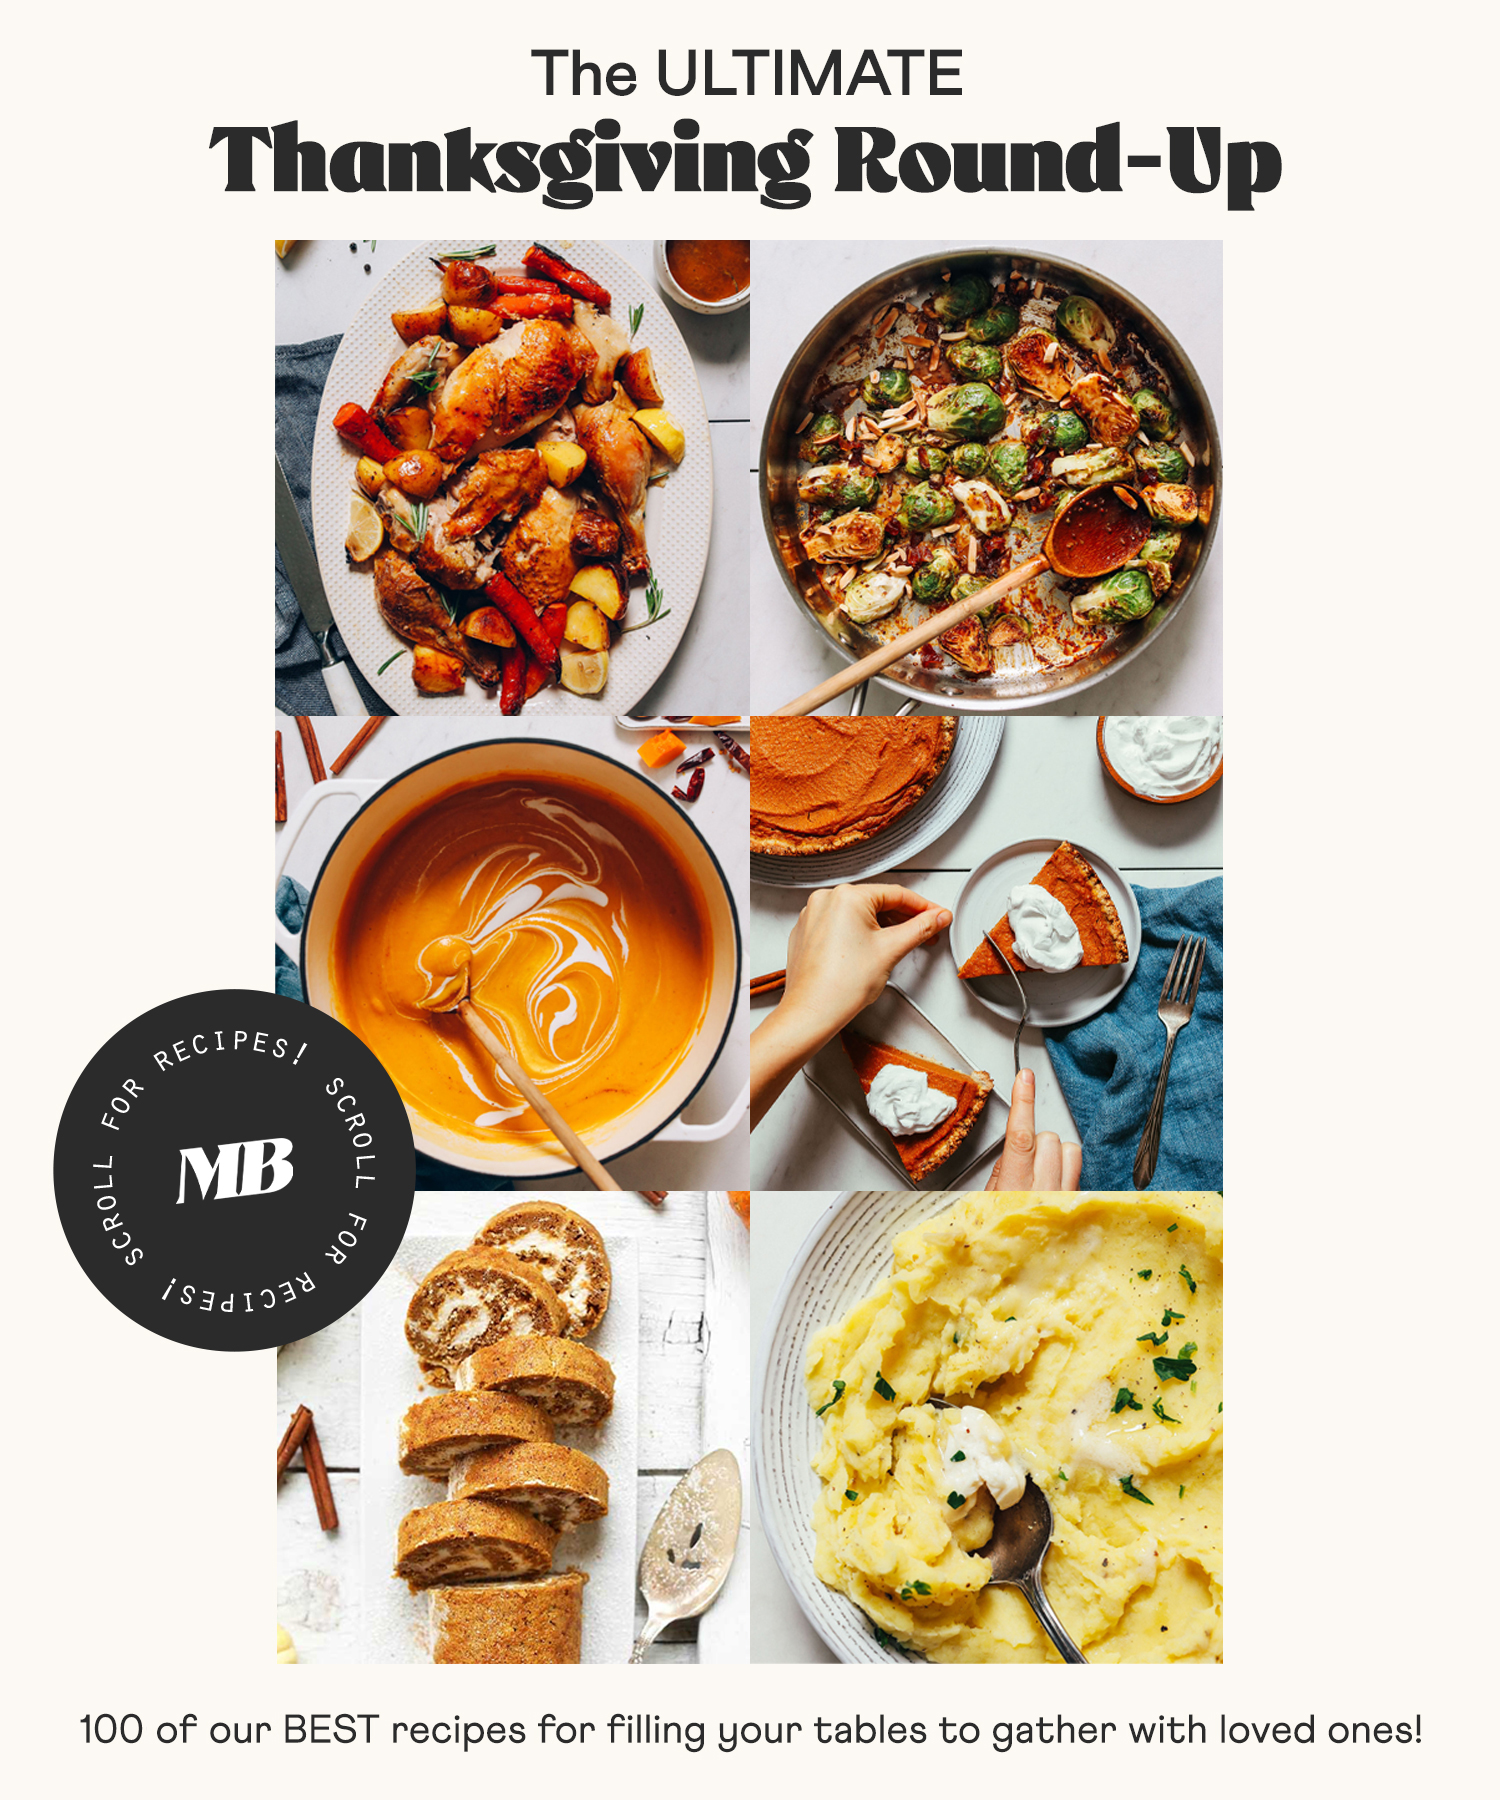 Assortment of Thanksgiving recipe photos for our ultimate thanksgiving recipes round-up